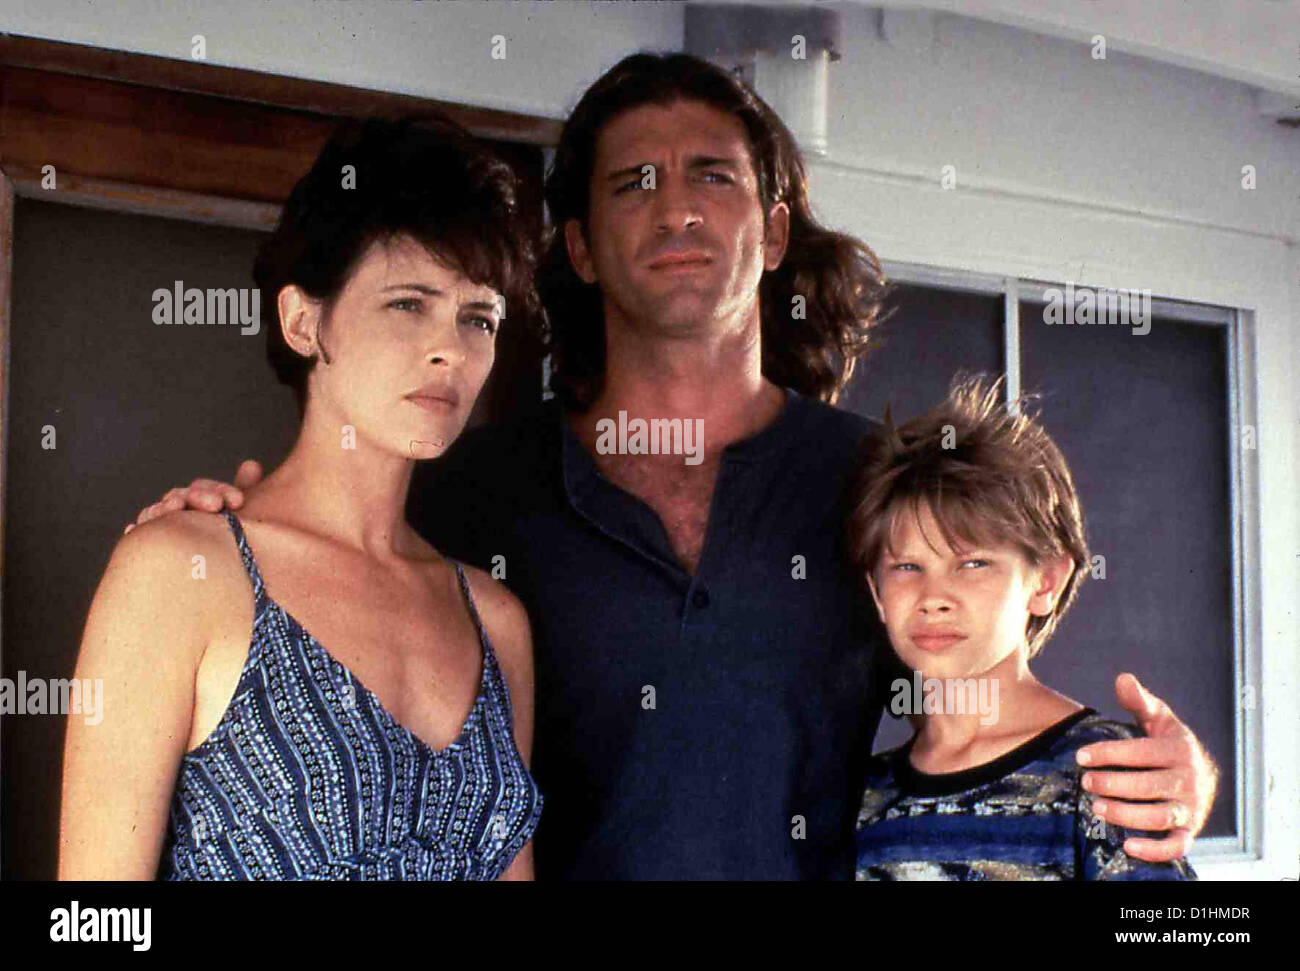 Flucht Ohne Wiederkehr  Any Place But Home  Mary Page Keller, Joe Lando, Lee Norris Roberta (Mary Page Keller) und Lucas Stock Photo